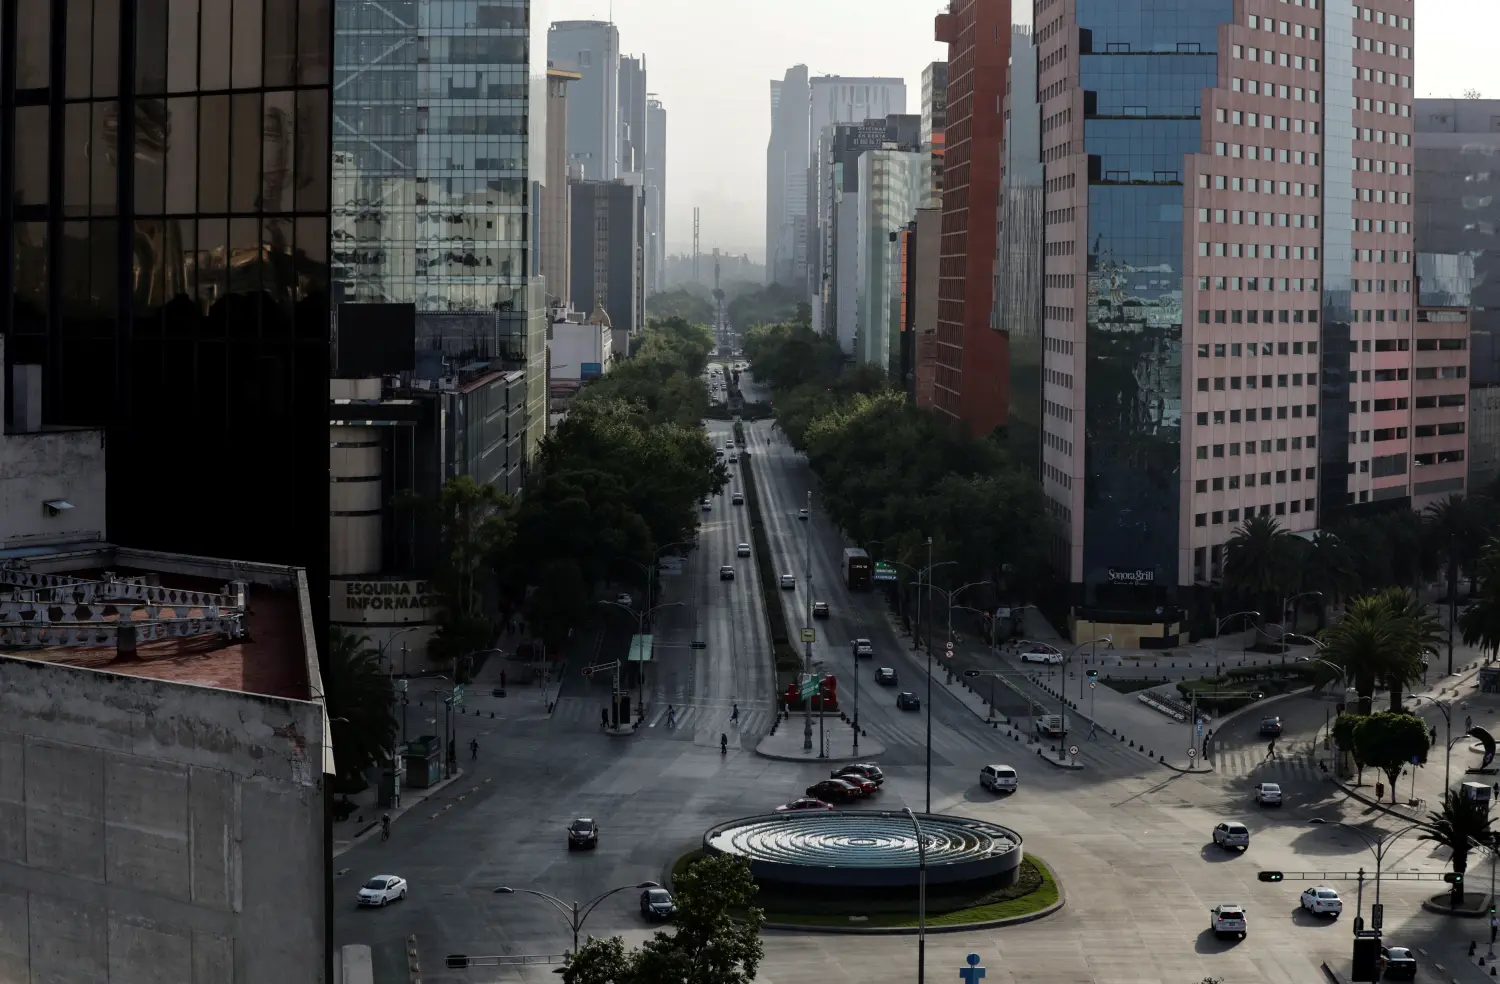 A general view shows the partially empty Reforma Avenue after Mexico's government declared a health emergency on Monday and issued stricter rules aimed at containing the fast-spreading coronavirus disease (COVID-19), in Mexico City, Mexico March 31, 2020. REUTERS/Henry Romero